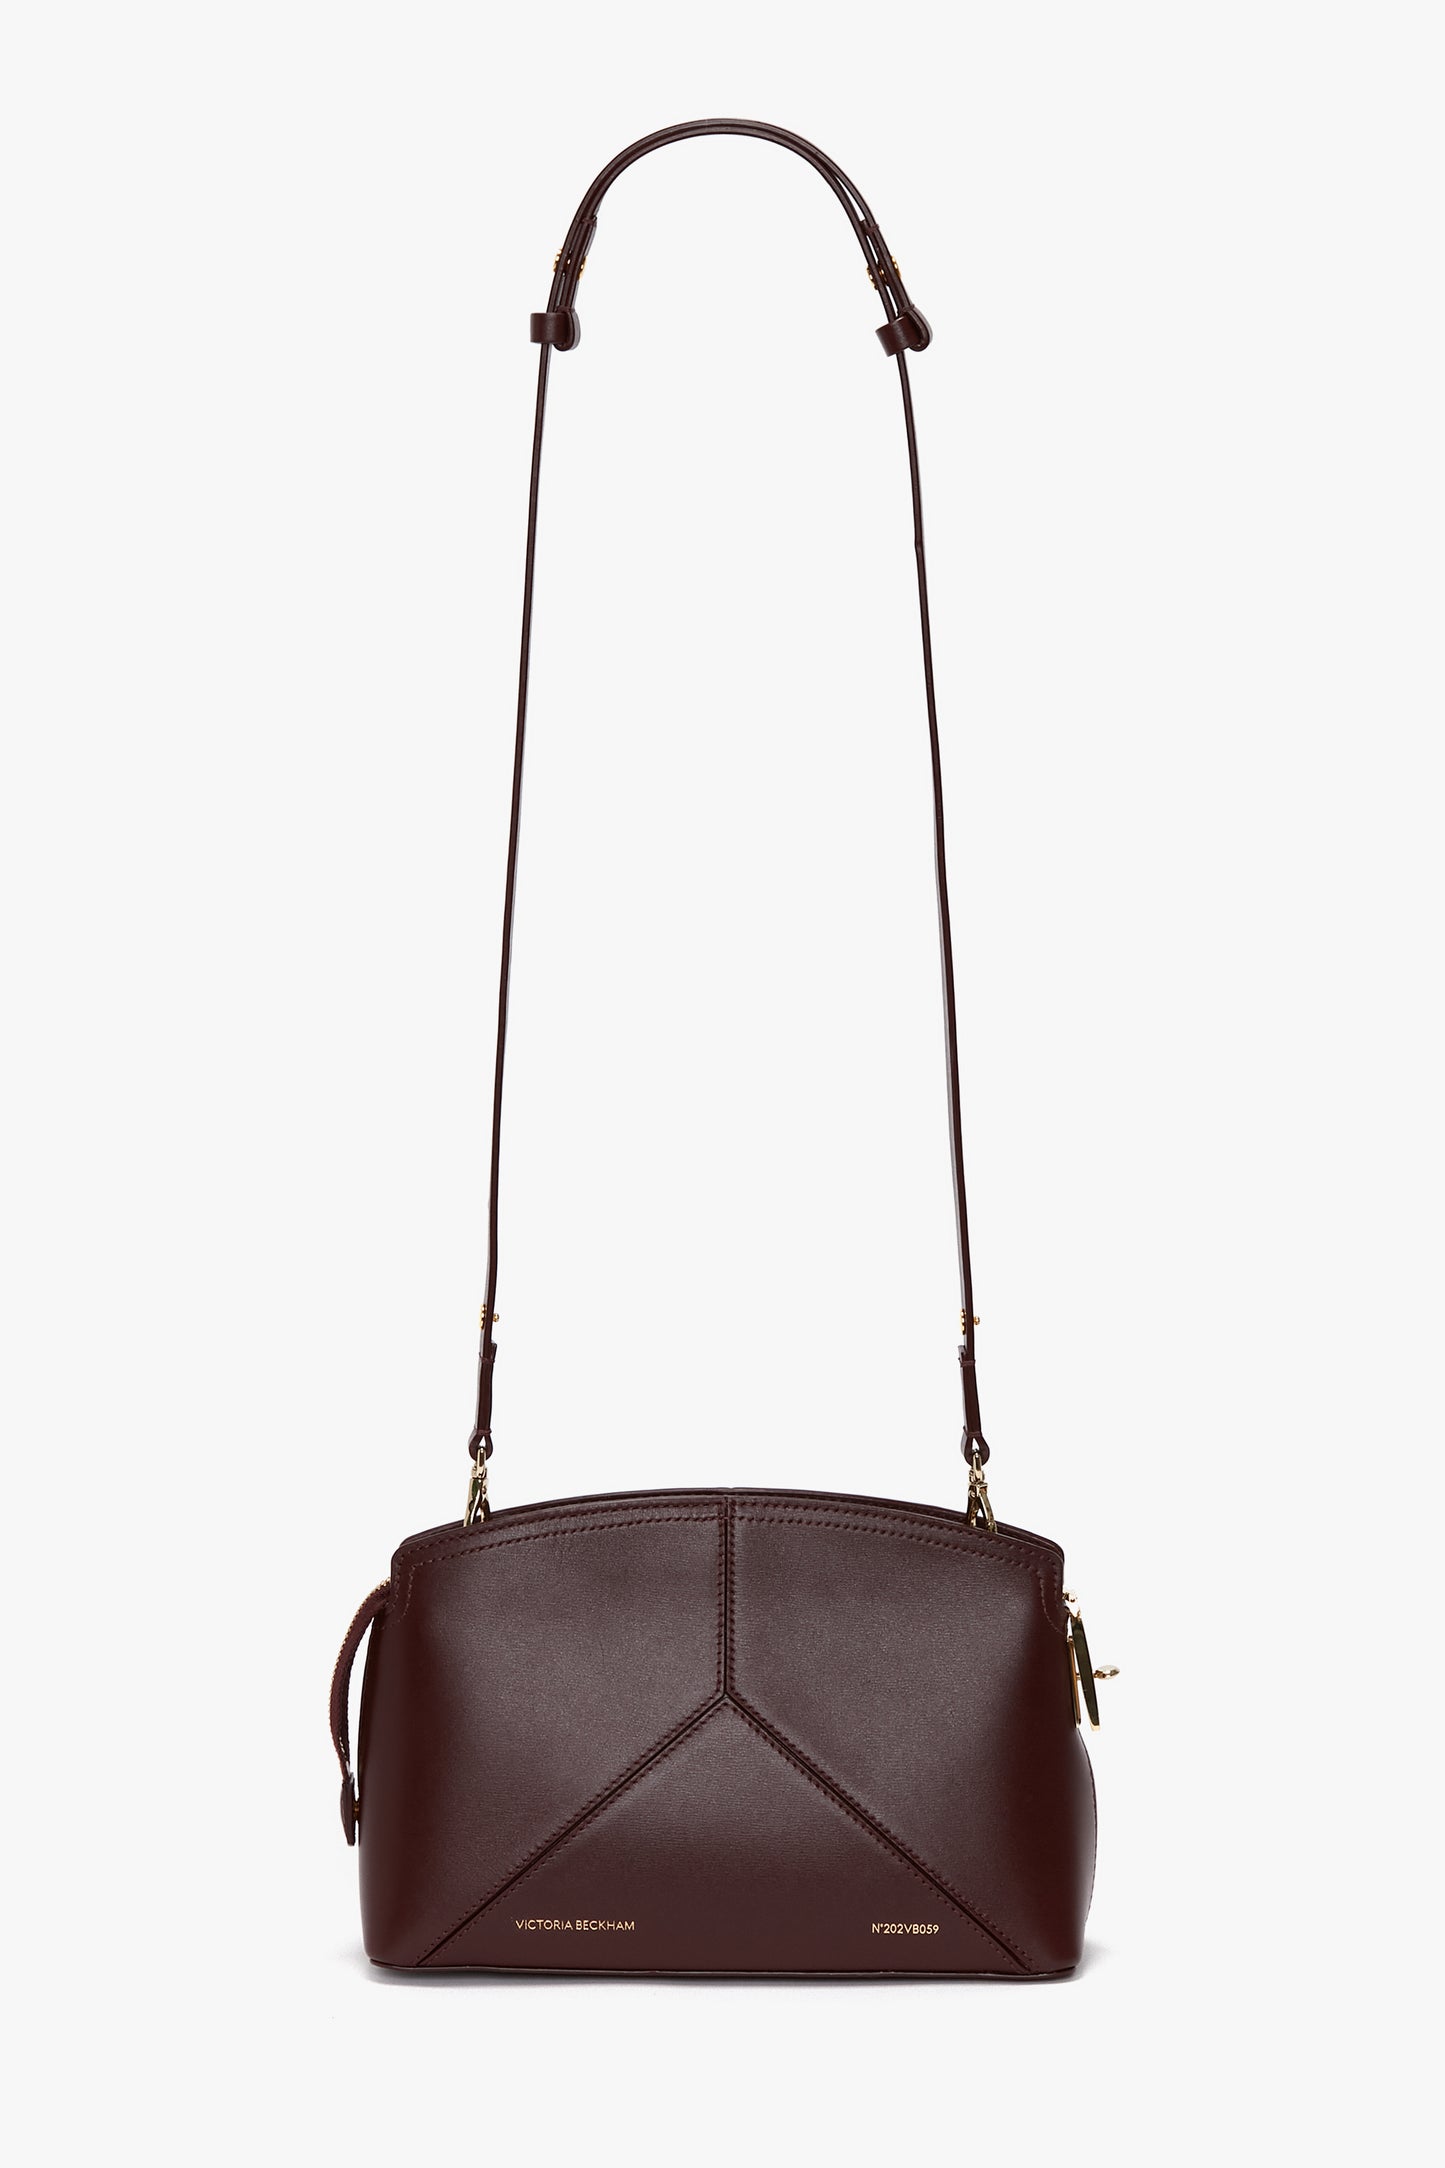 The Victoria Beckham Victoria Crossbody Bag In Burgundy Leather is a small, dark brown leather bag crafted from textured calf leather. It features a long adjustable strap, gold hardware, a padlock closure, and stitched geometric patterns on the front.